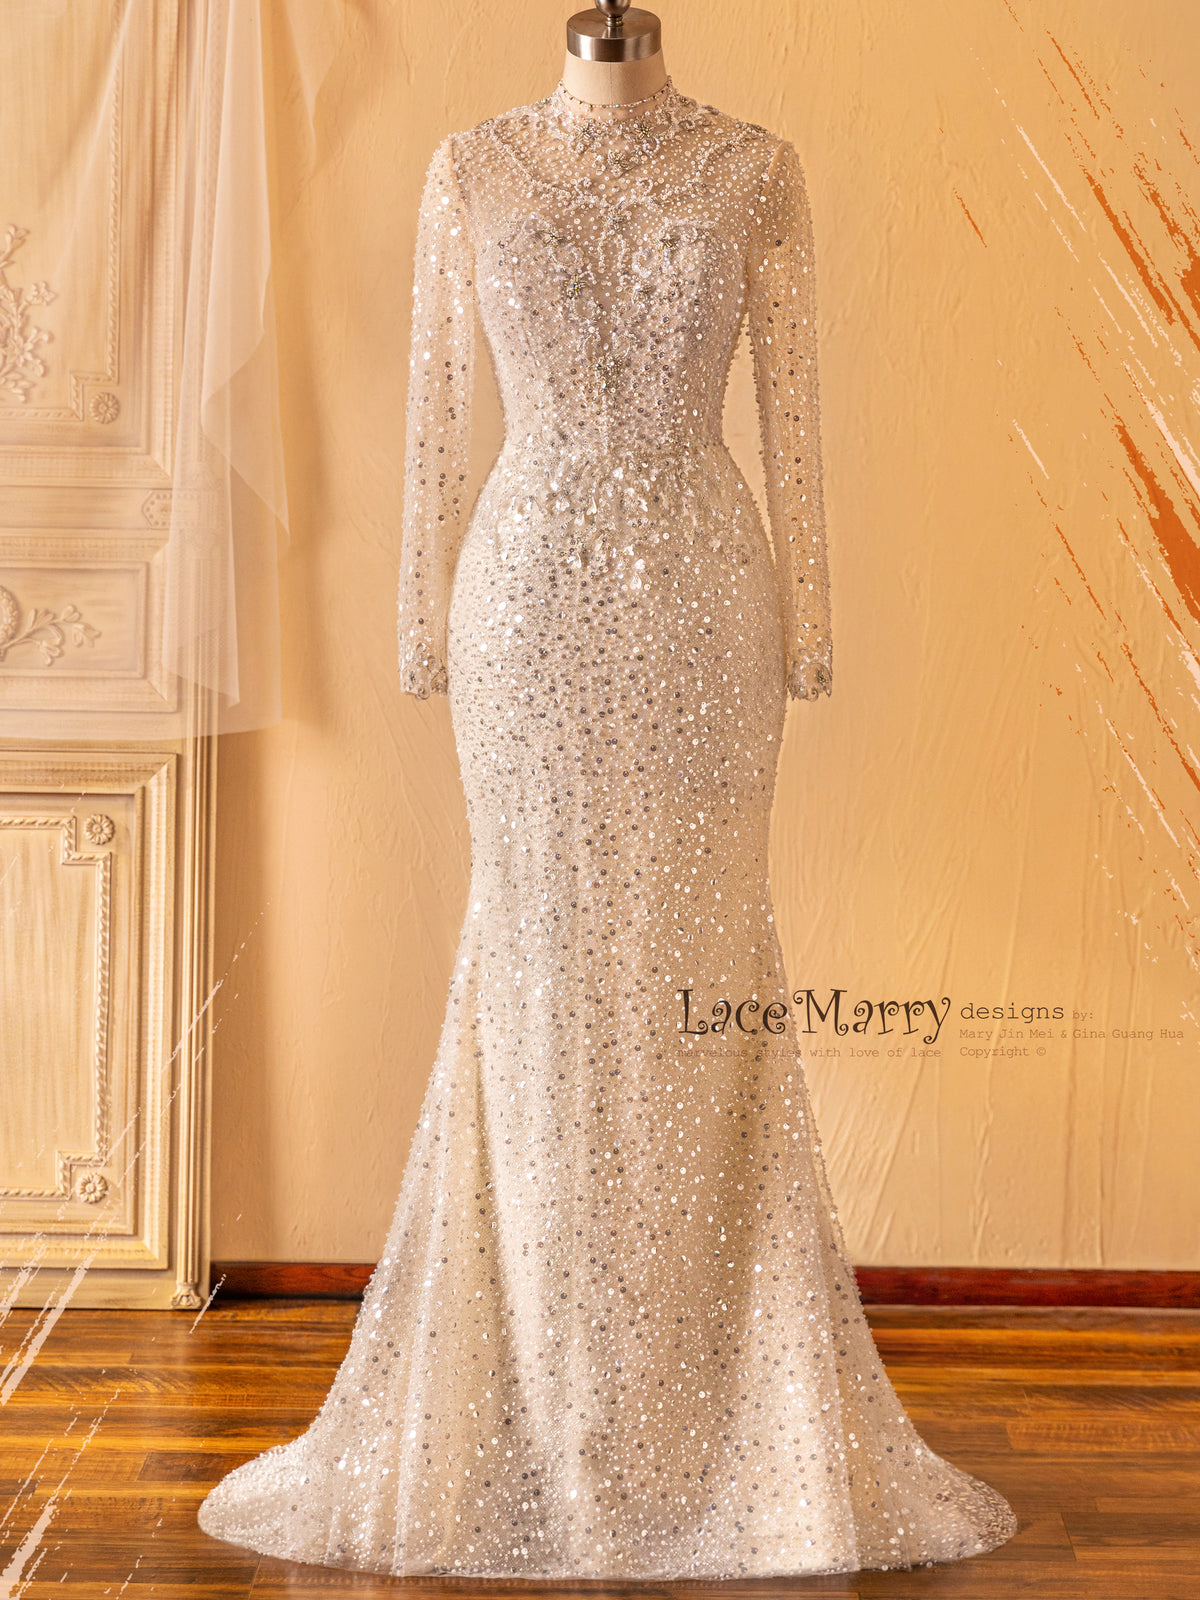 Sparkling Wedding Dress with Long Sleeves - LaceMarry